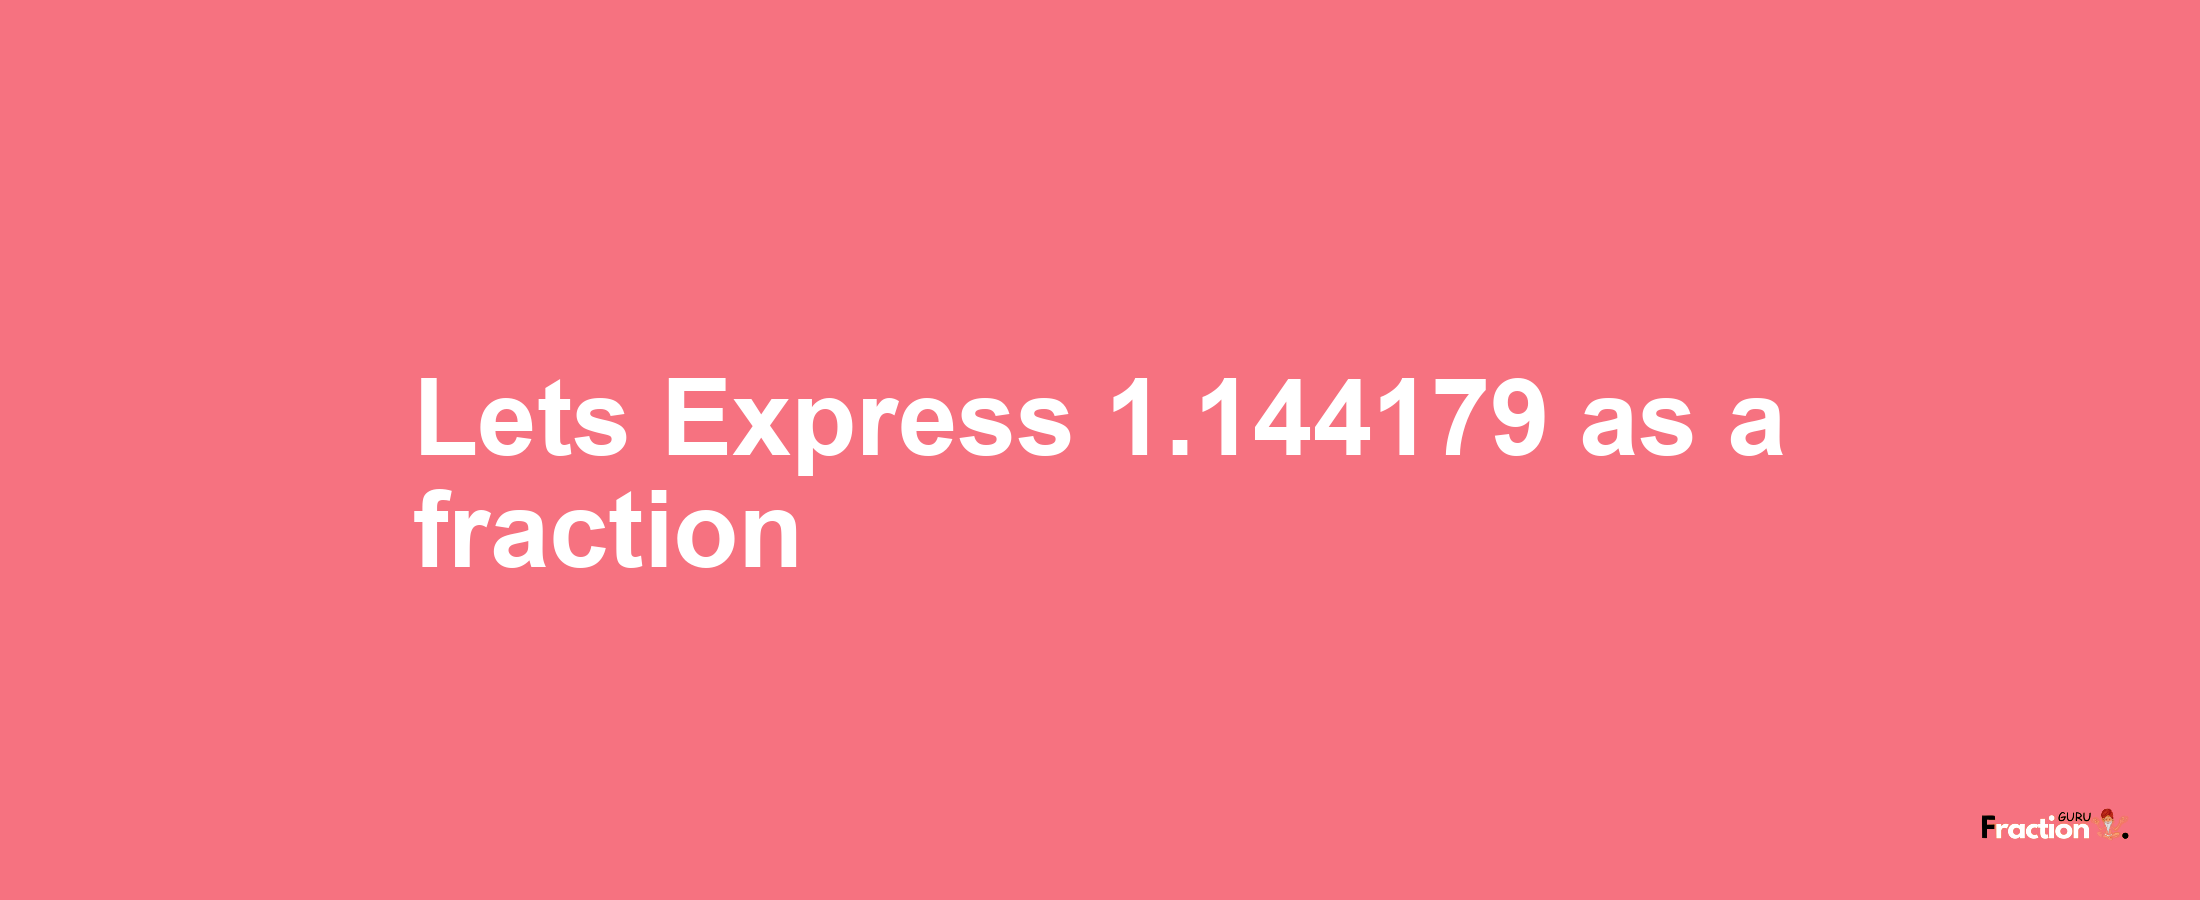 Lets Express 1.144179 as afraction